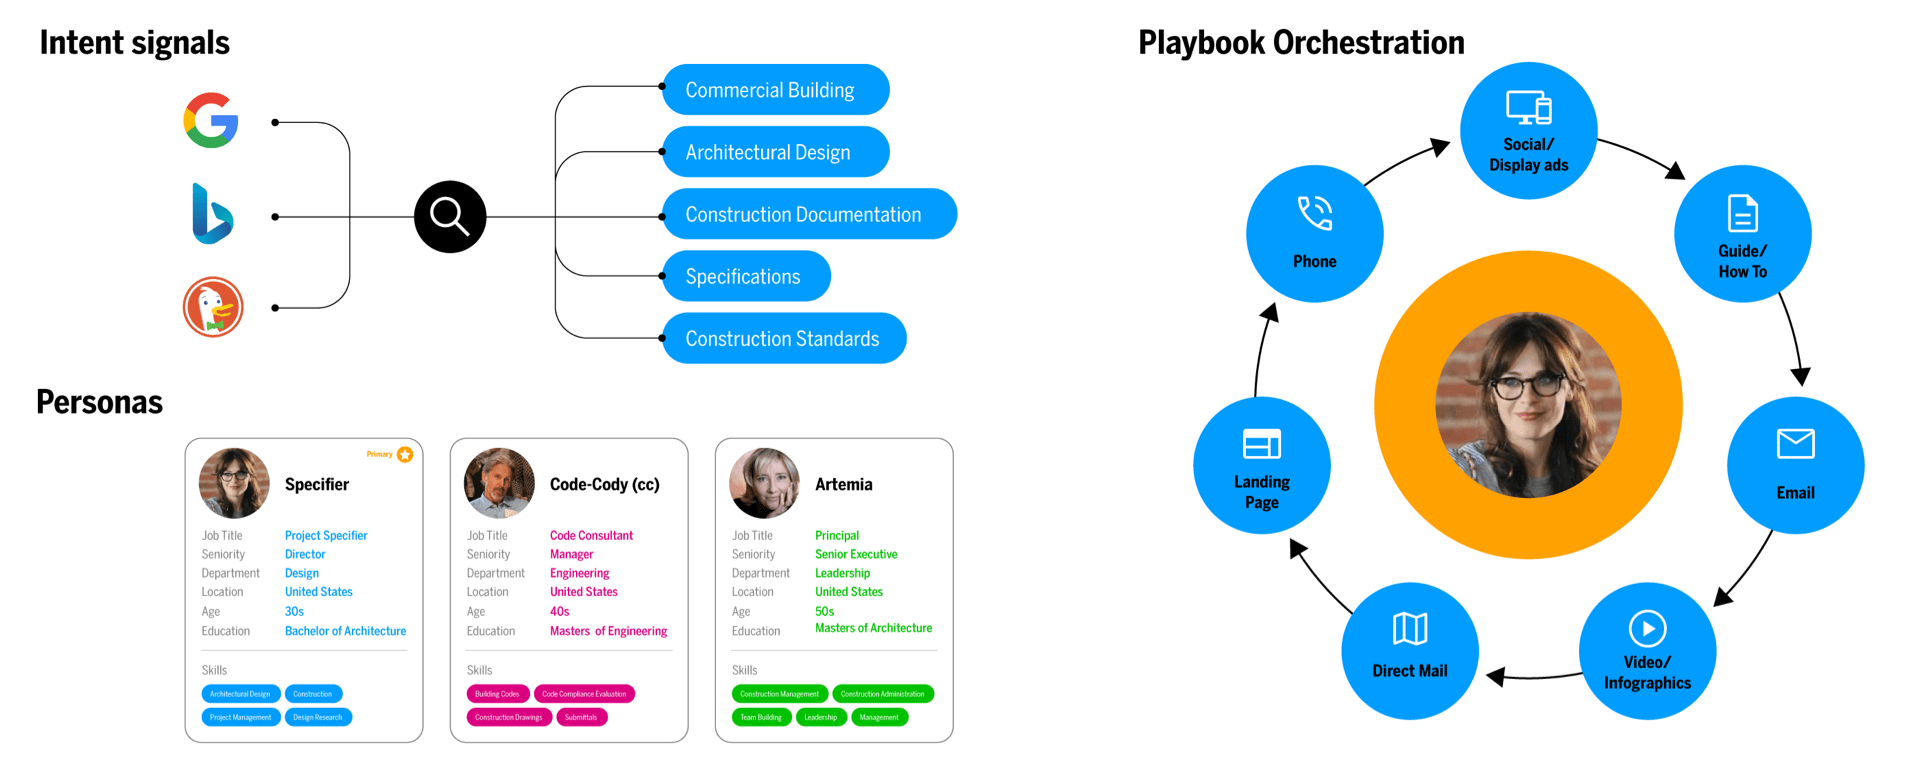 Intent signals, Playbook Orchestration and Personas charts